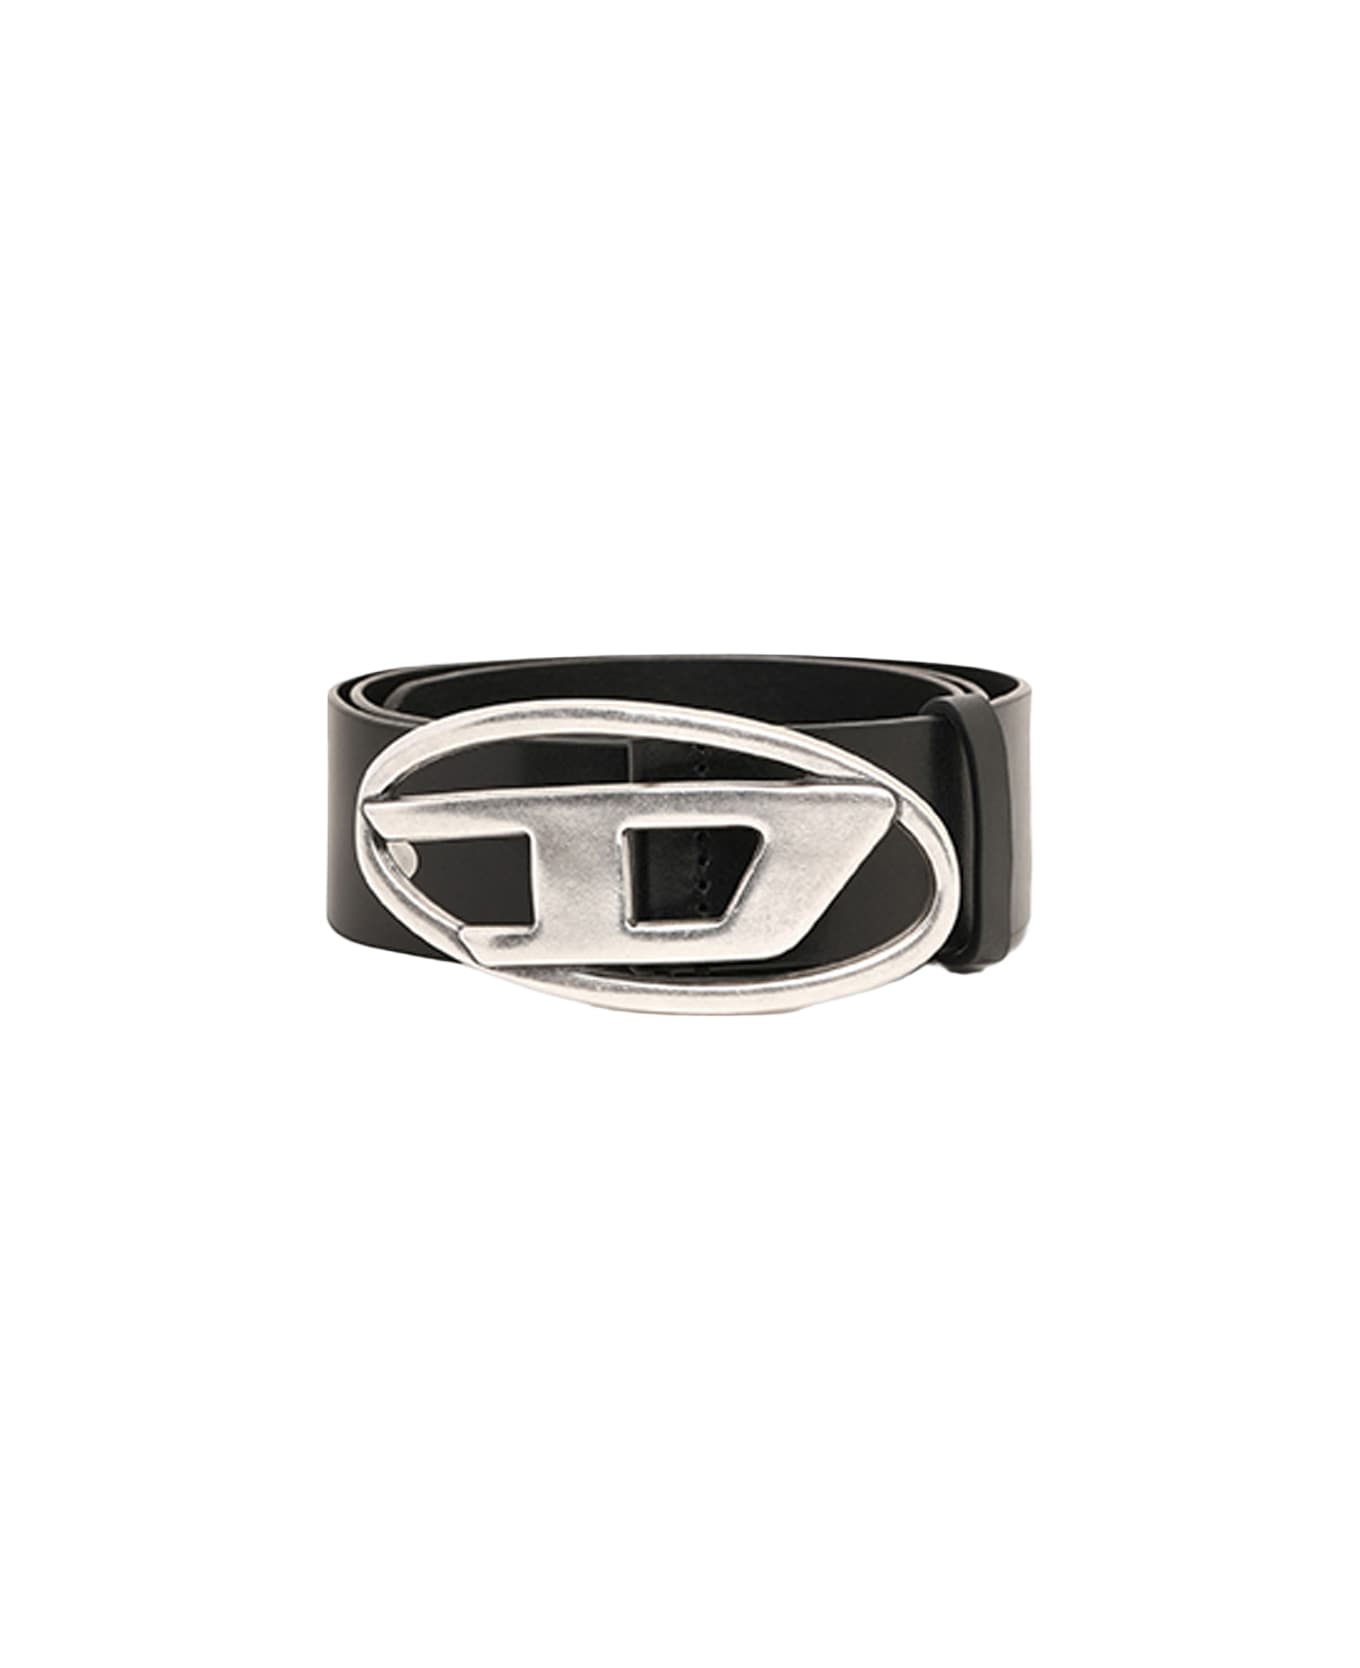 Diesel B-1dr Black leather belt with Oval D buckle - B 1DR - Nero name:456